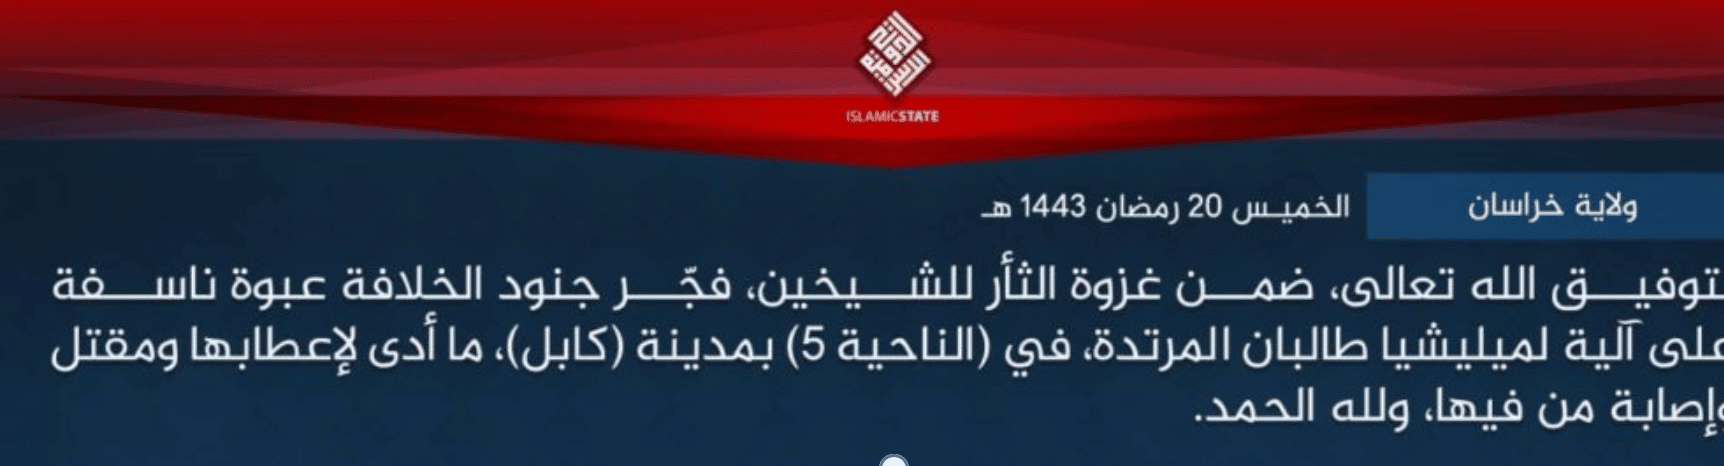 Islamic State Khurasan (ISK) Claims Third Bombing In The Country In One Day - PD 5, Kabul, Afghanistan